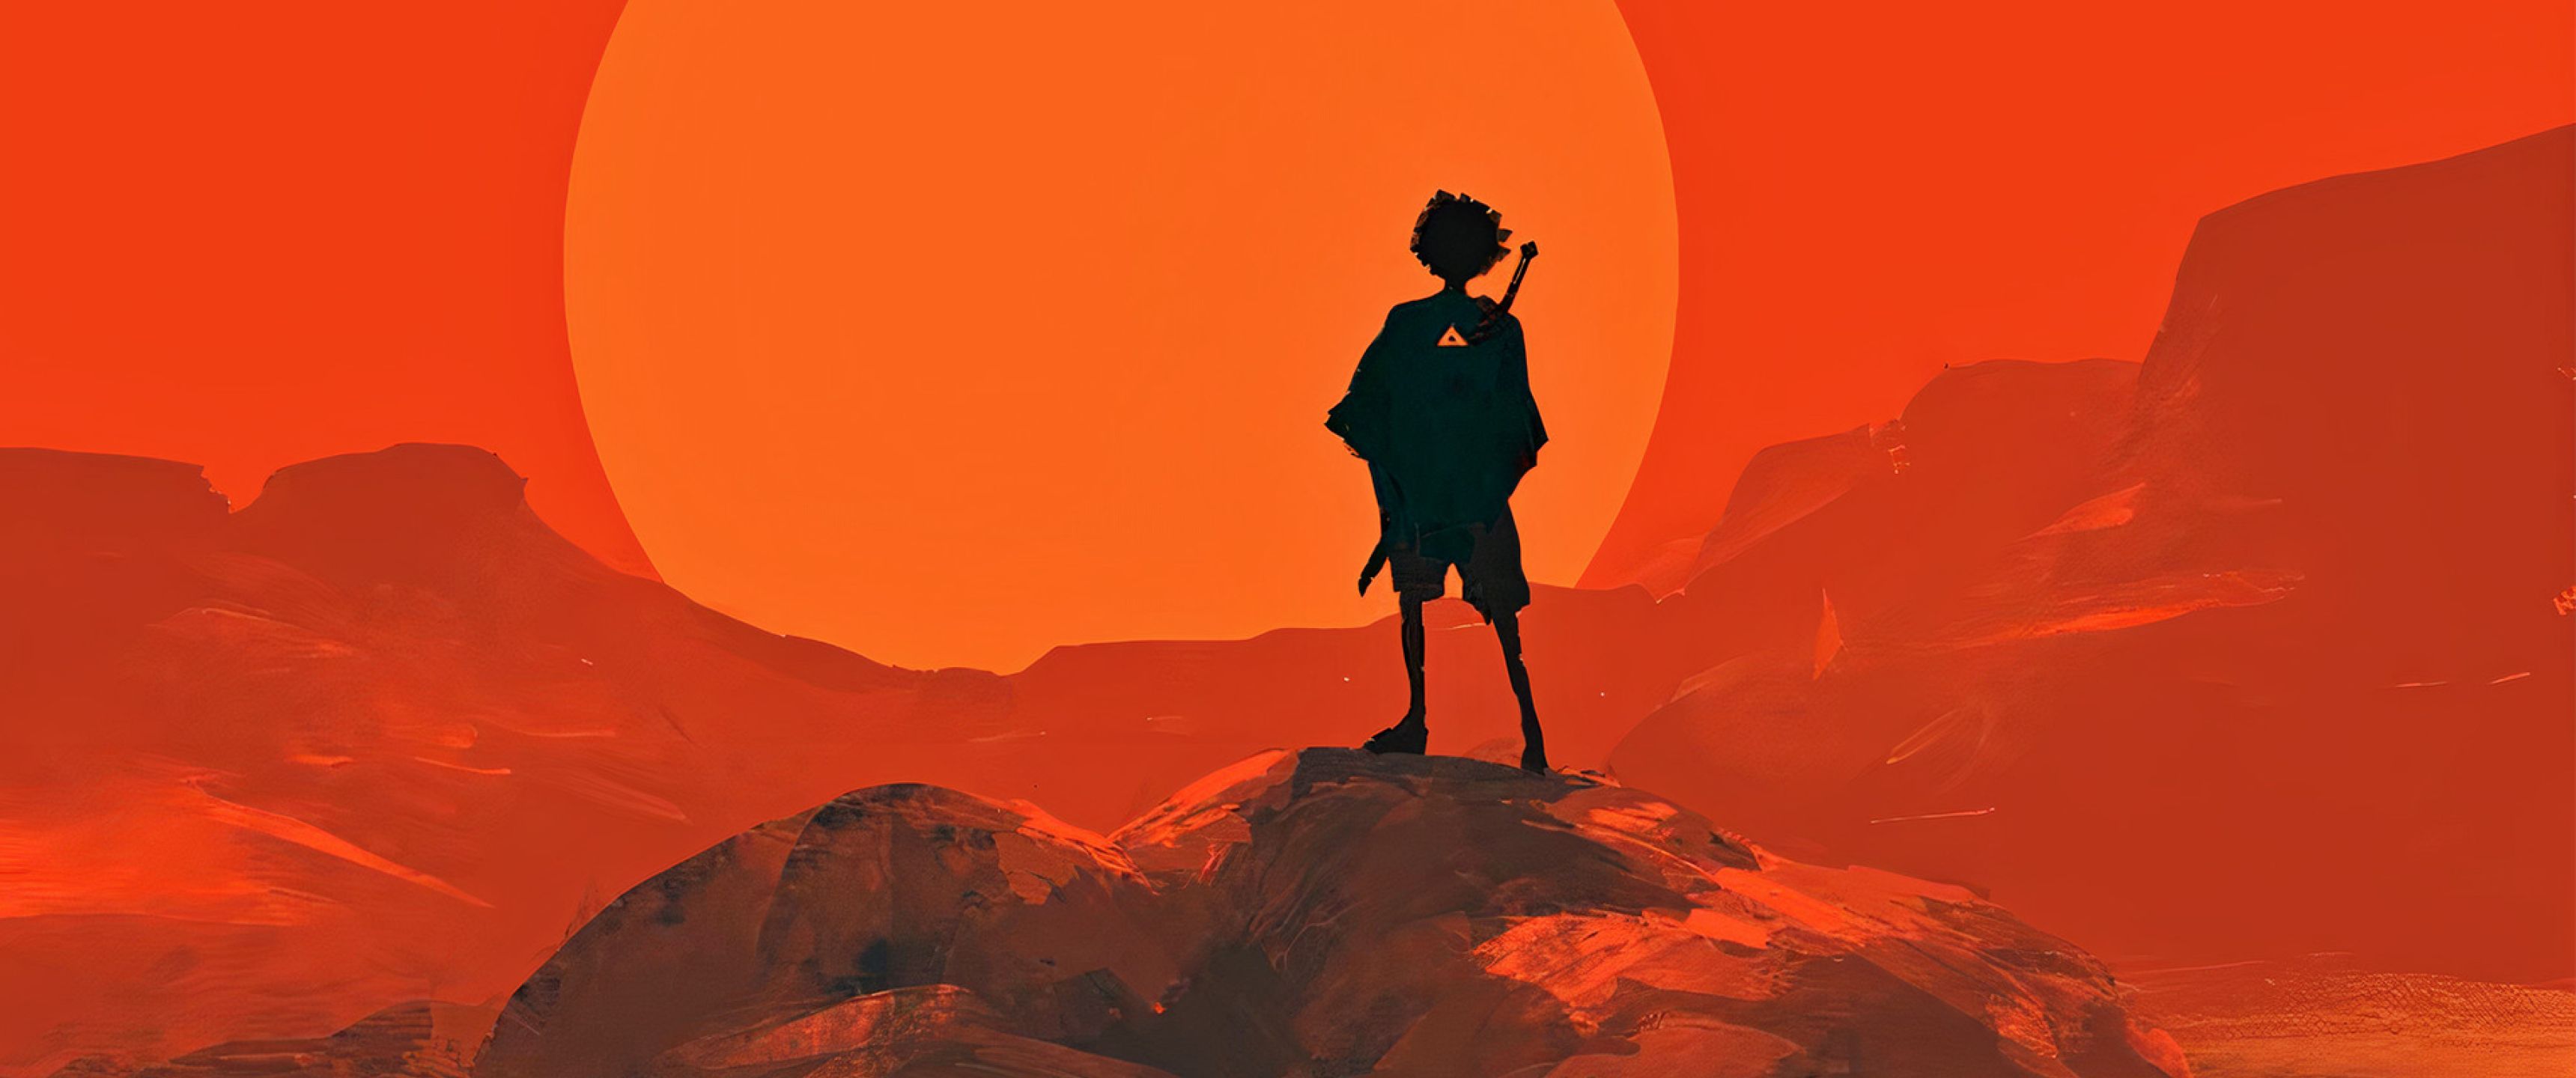 A man standing on top of the mountain with an orange sun in front - Samurai